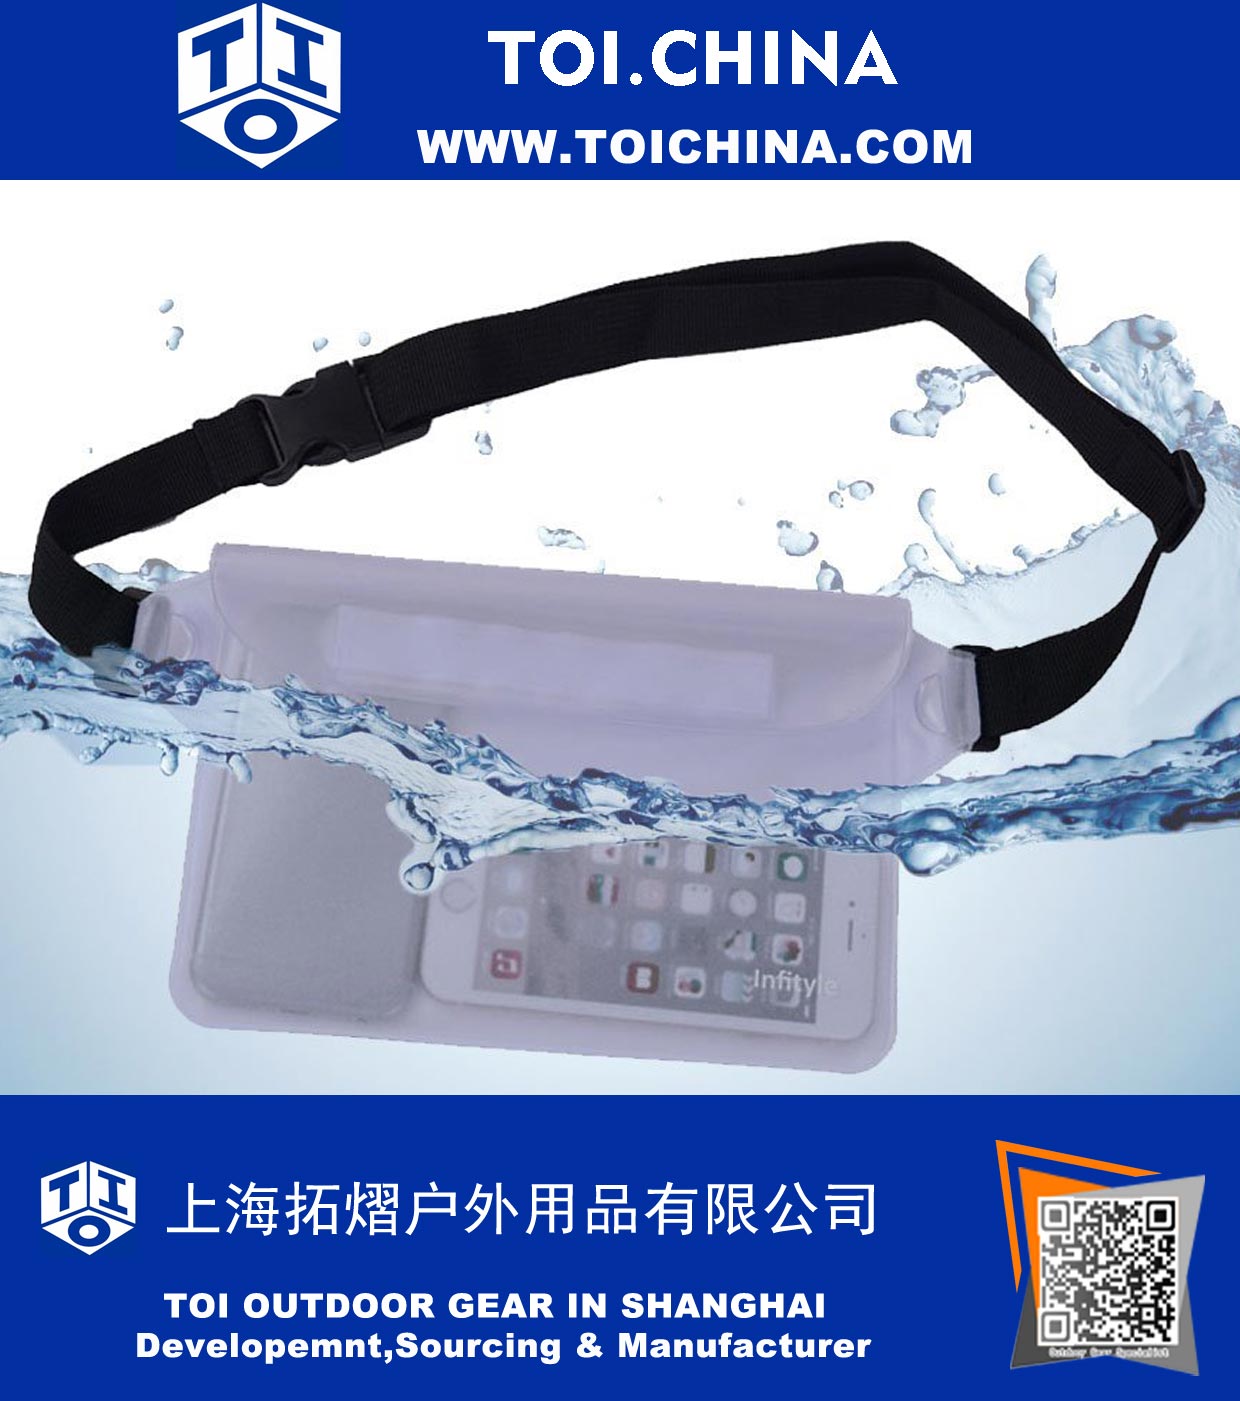 Waterproof Pouches